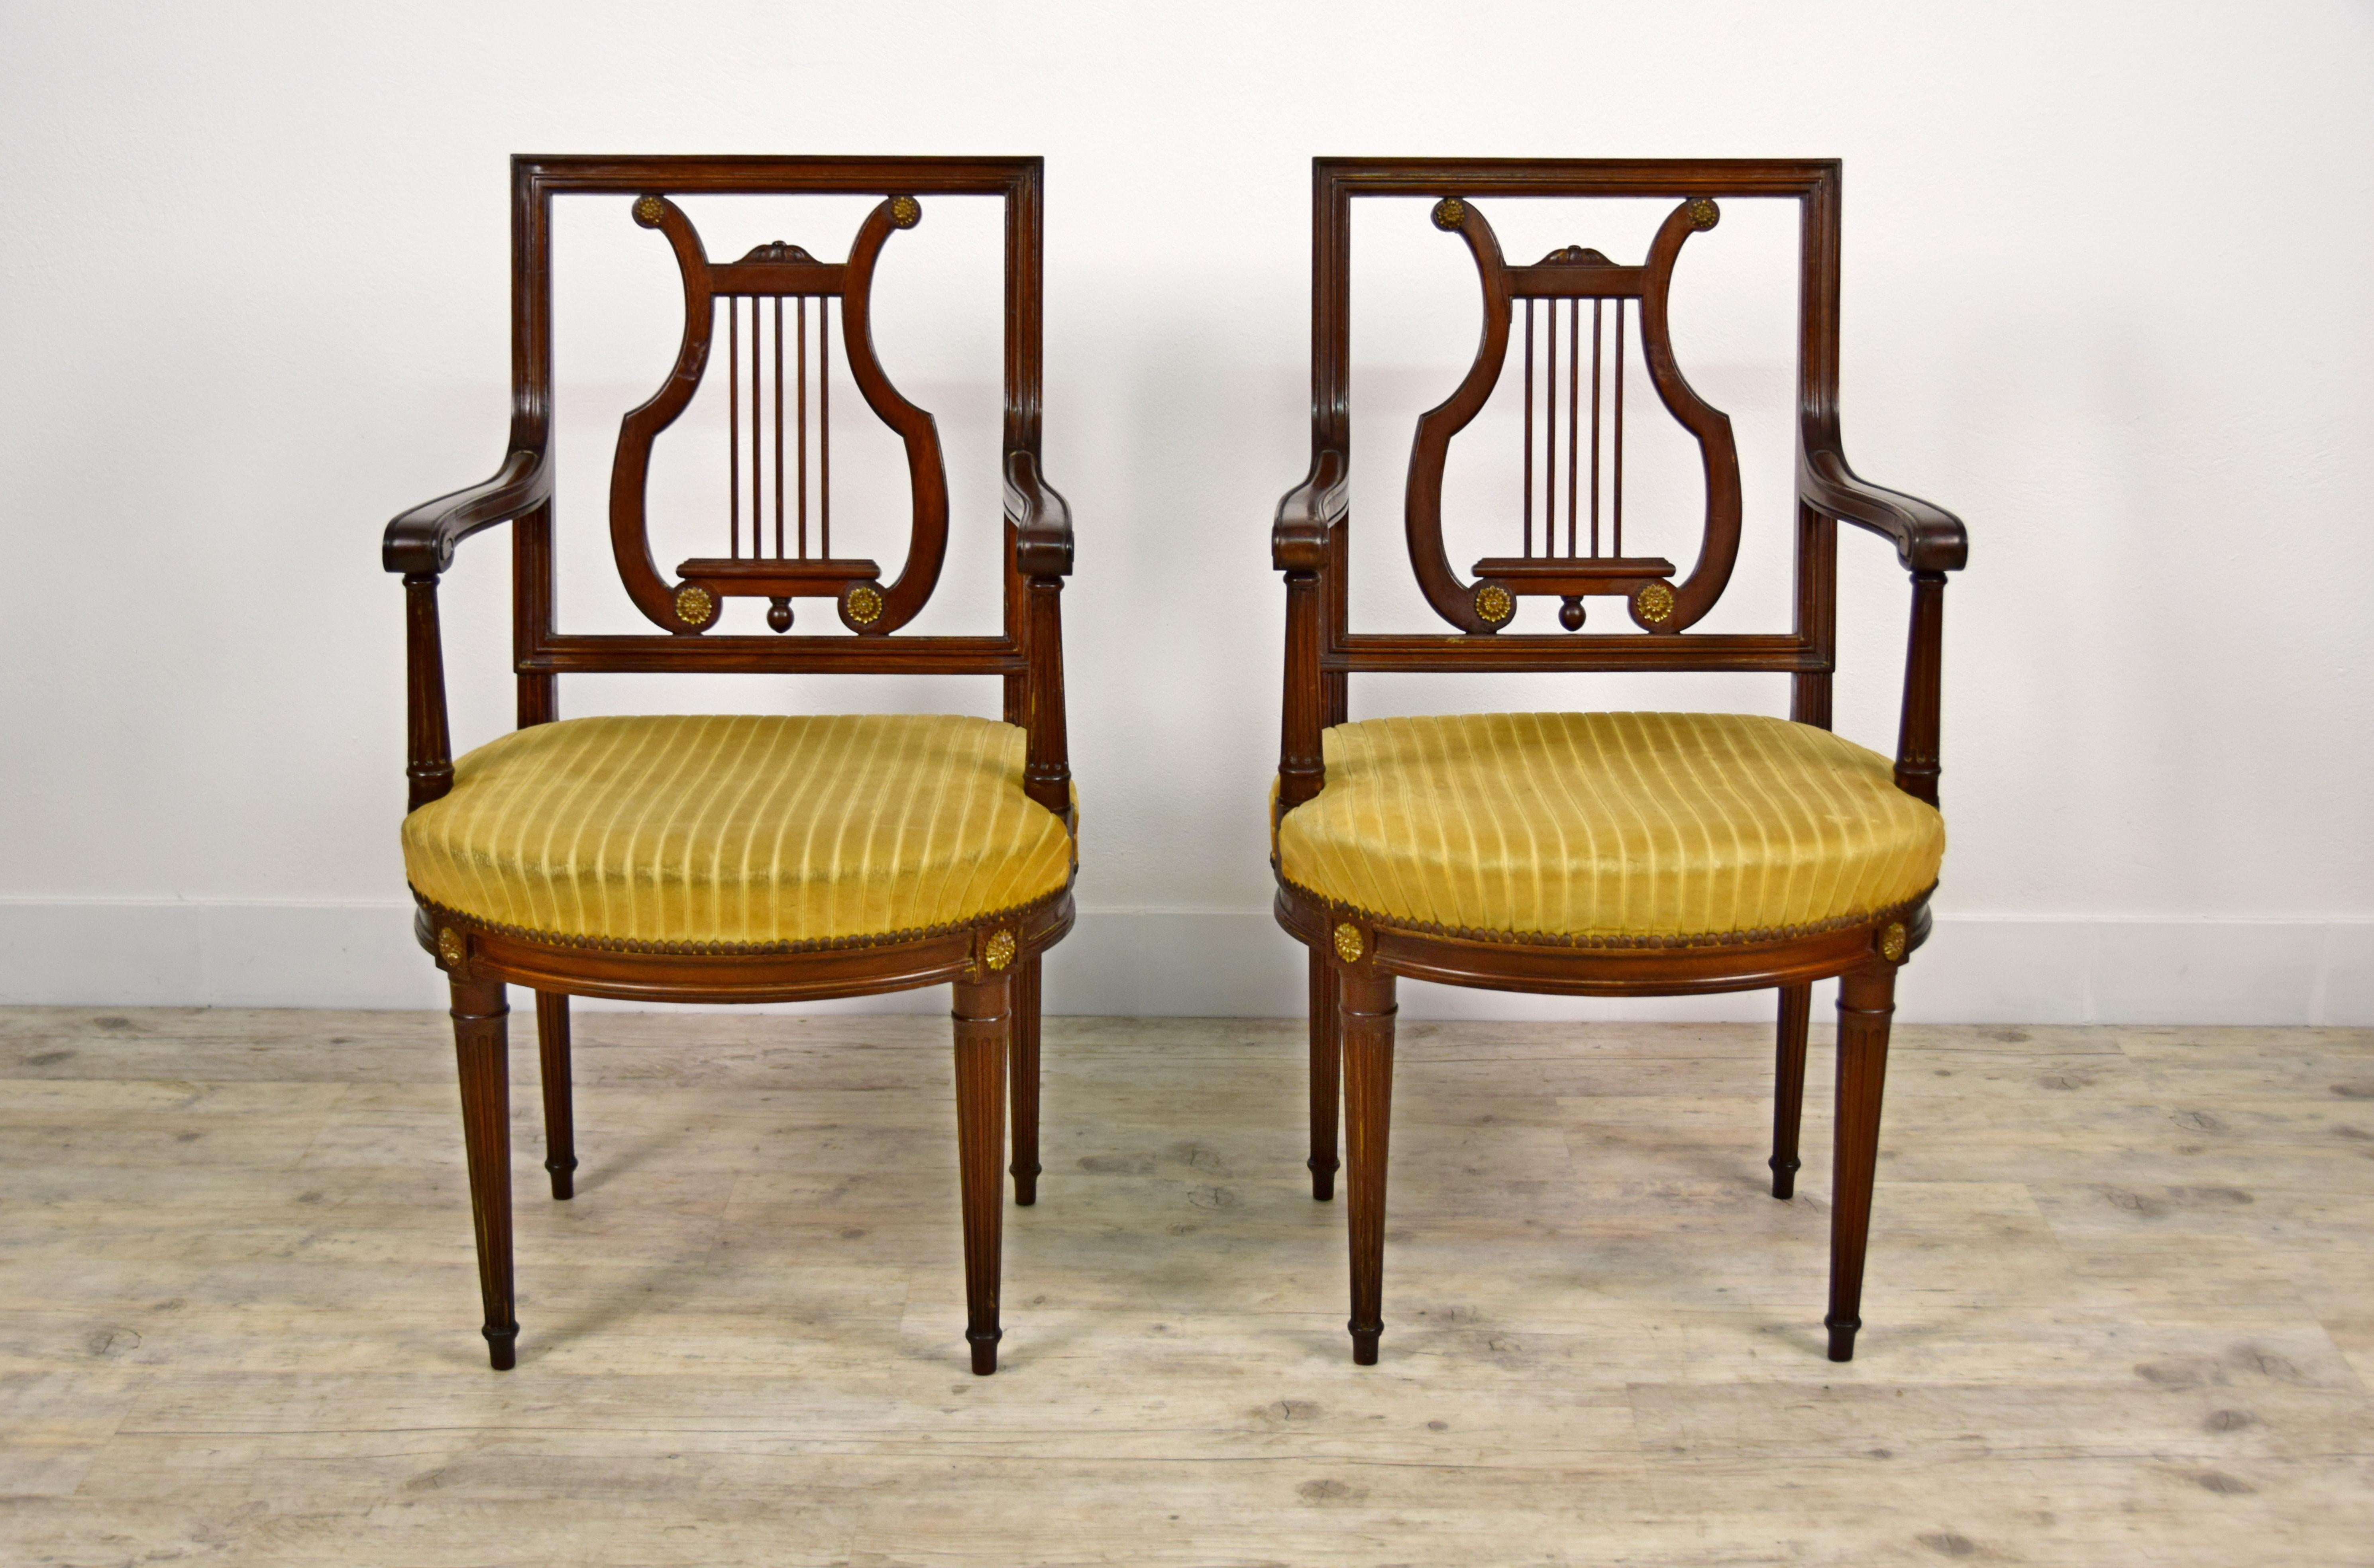 19th century, French Louis XVI style six wood chairs and two wood armchairs 
France, late 19th century

Size: chairs, cm H back 90, seat height 46 x W 44 x D 50; armchairs, H back 94 x seat height 46 x W 56 x D 60

The six chairs and two